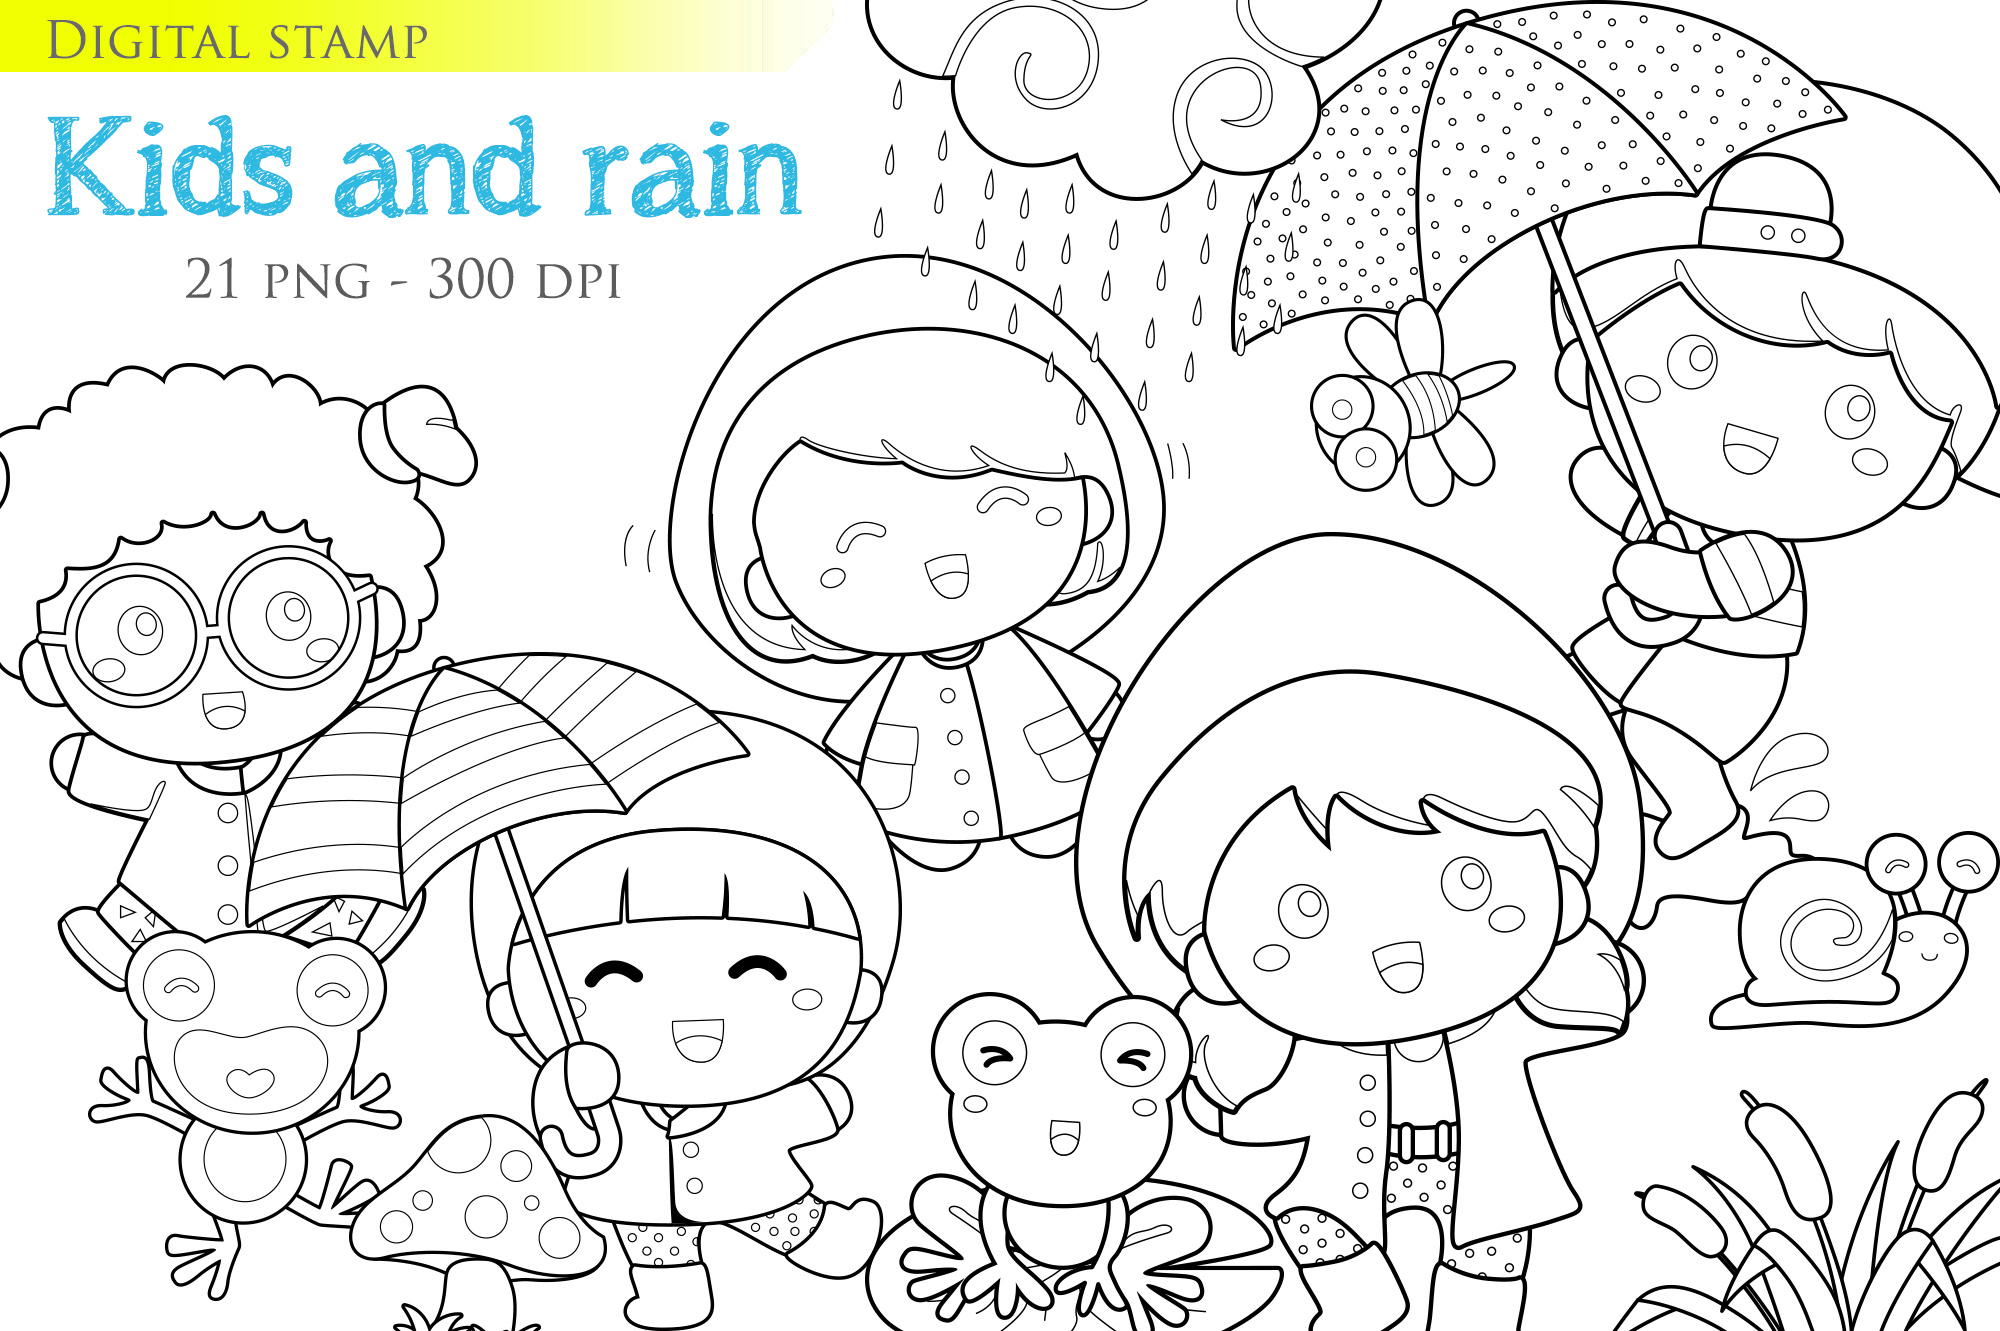 Black and white picture of kids and rain.